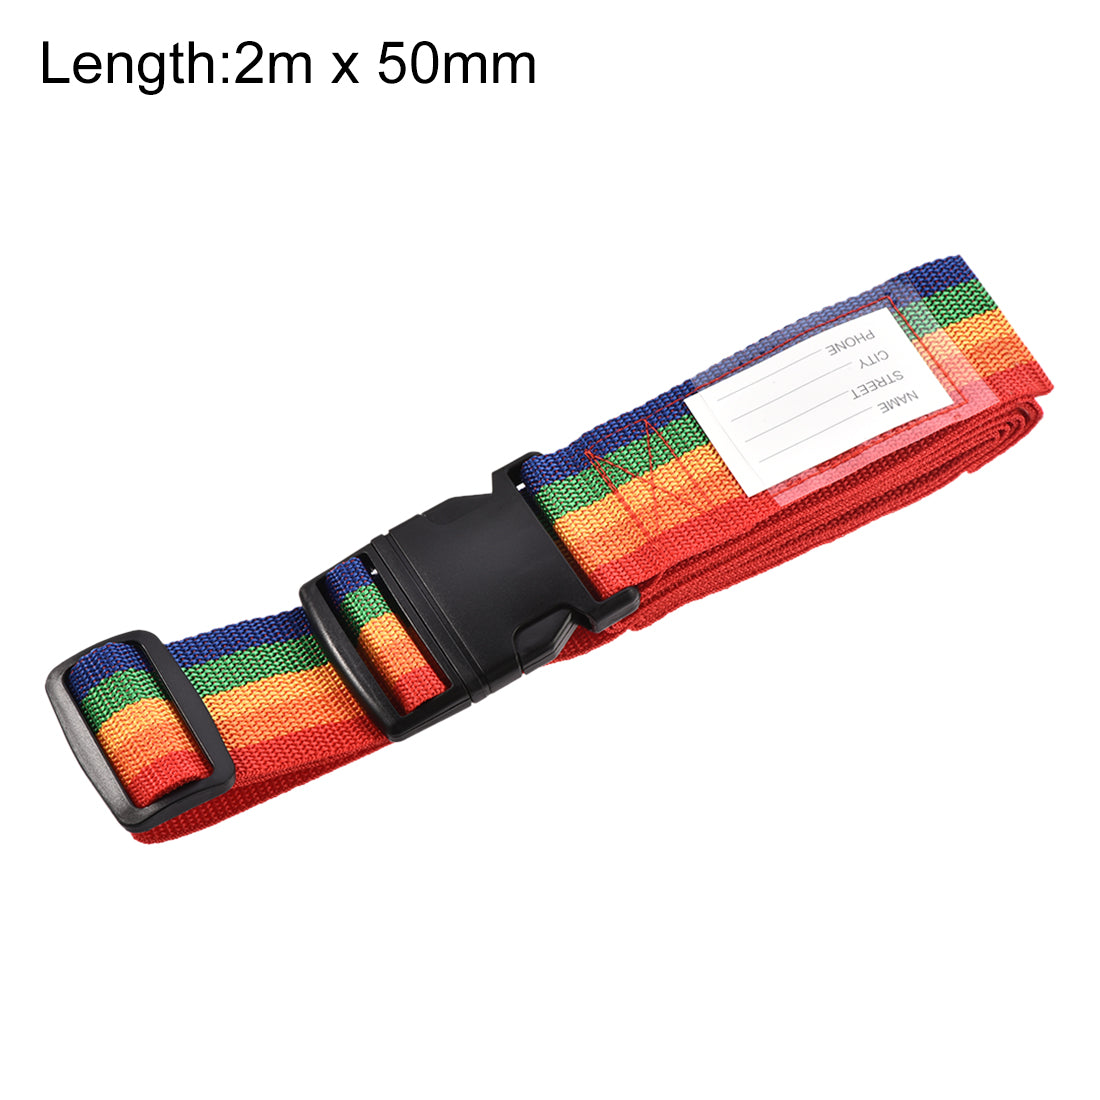 uxcell Uxcell Luggage Straps Suitcase Belts with Buckle Label, 2Mx5cm Adjustable PP Travel Bag Packing Accessories, Multi Color (Red Orange Yellow Green Blue) 2Pcs